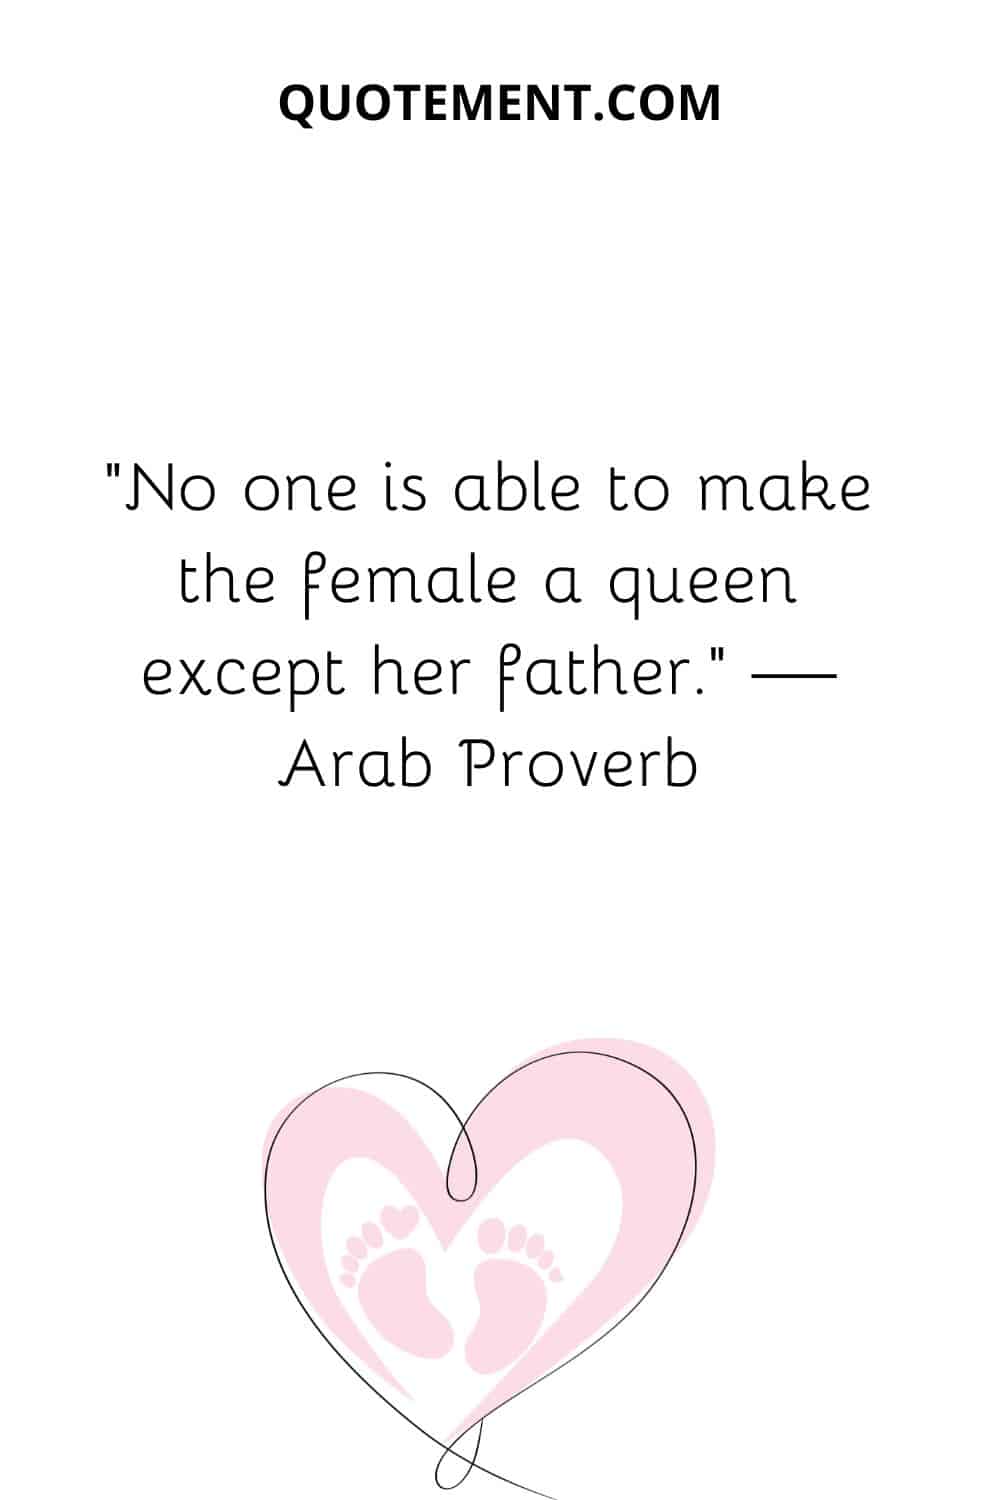 No one is able to make the female a queen except her father